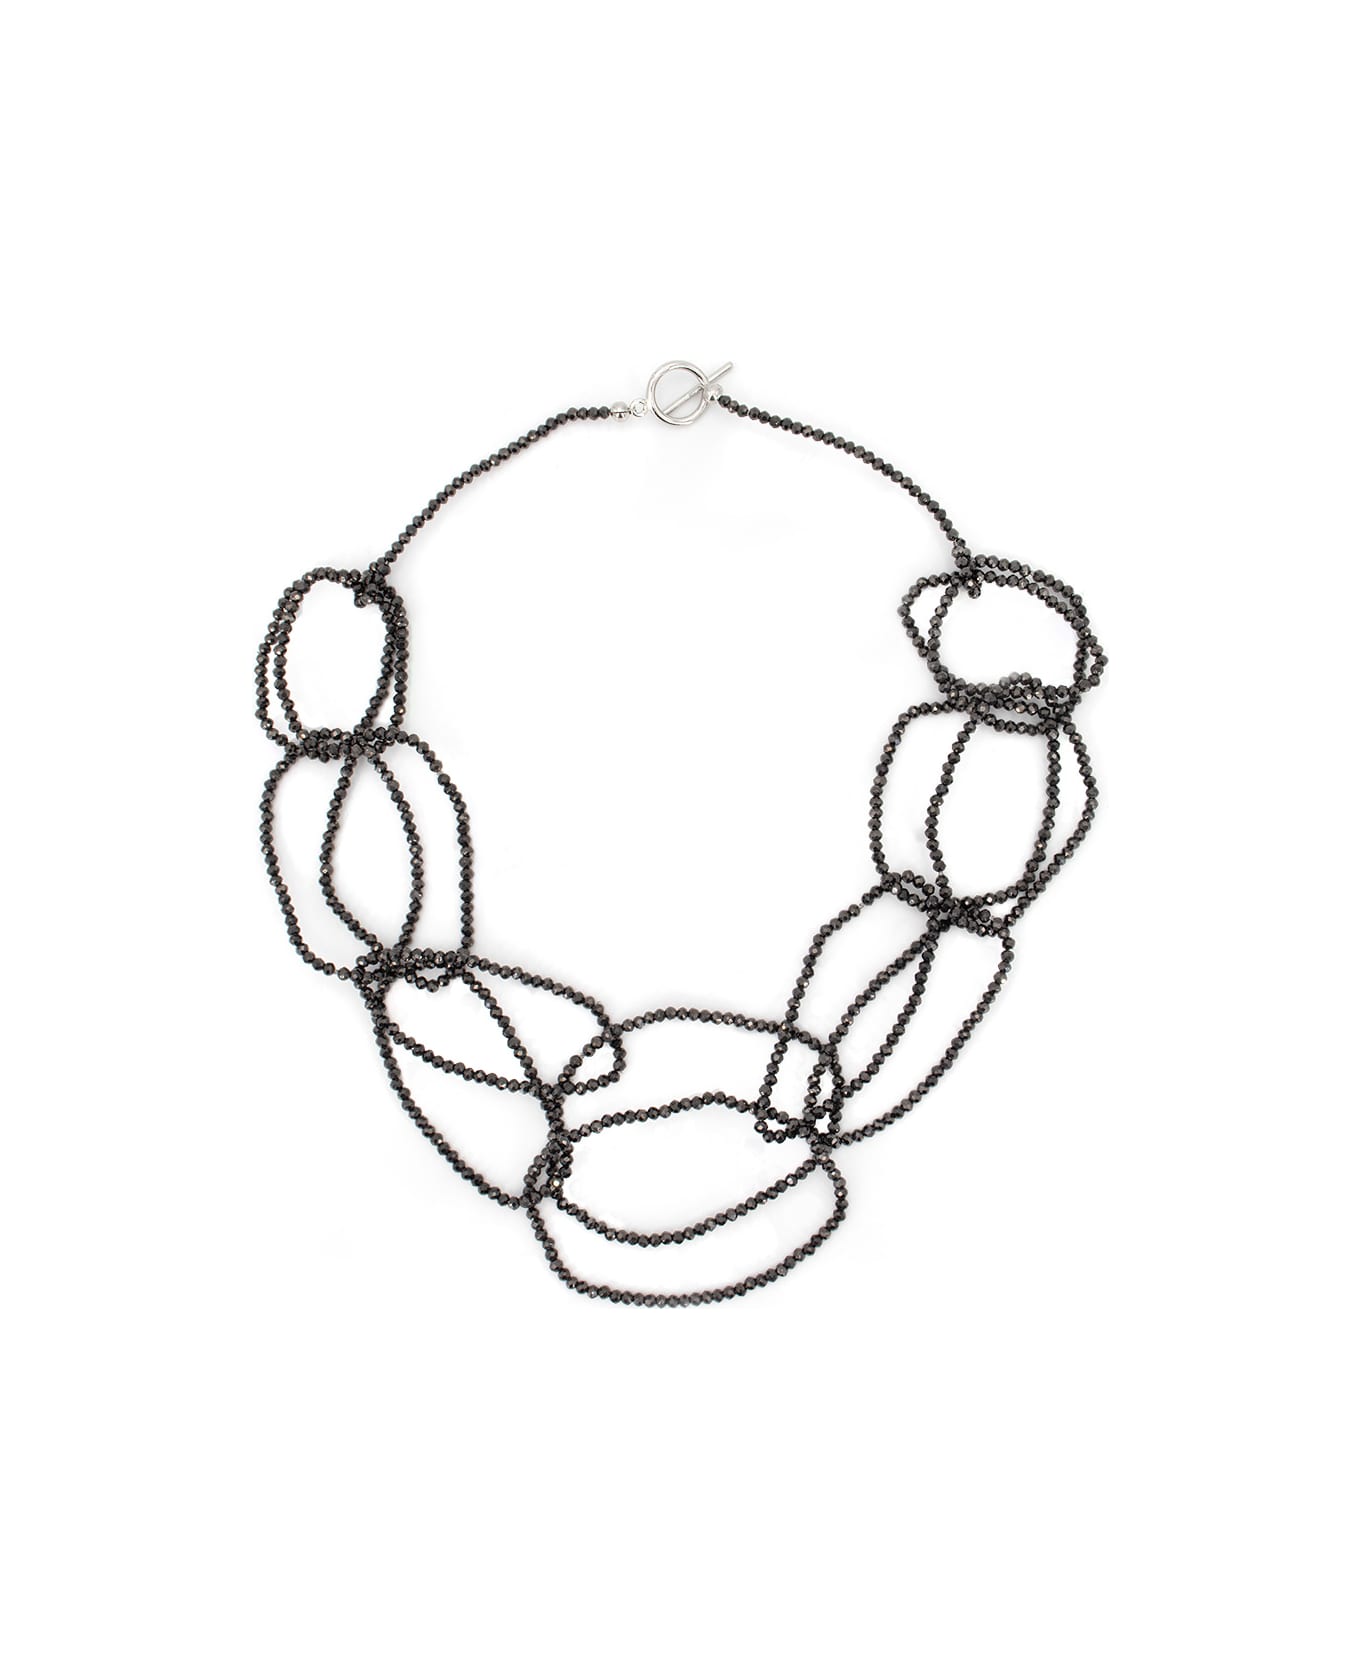 Le Tricot Perugia Necklace - BROWN ネックレス